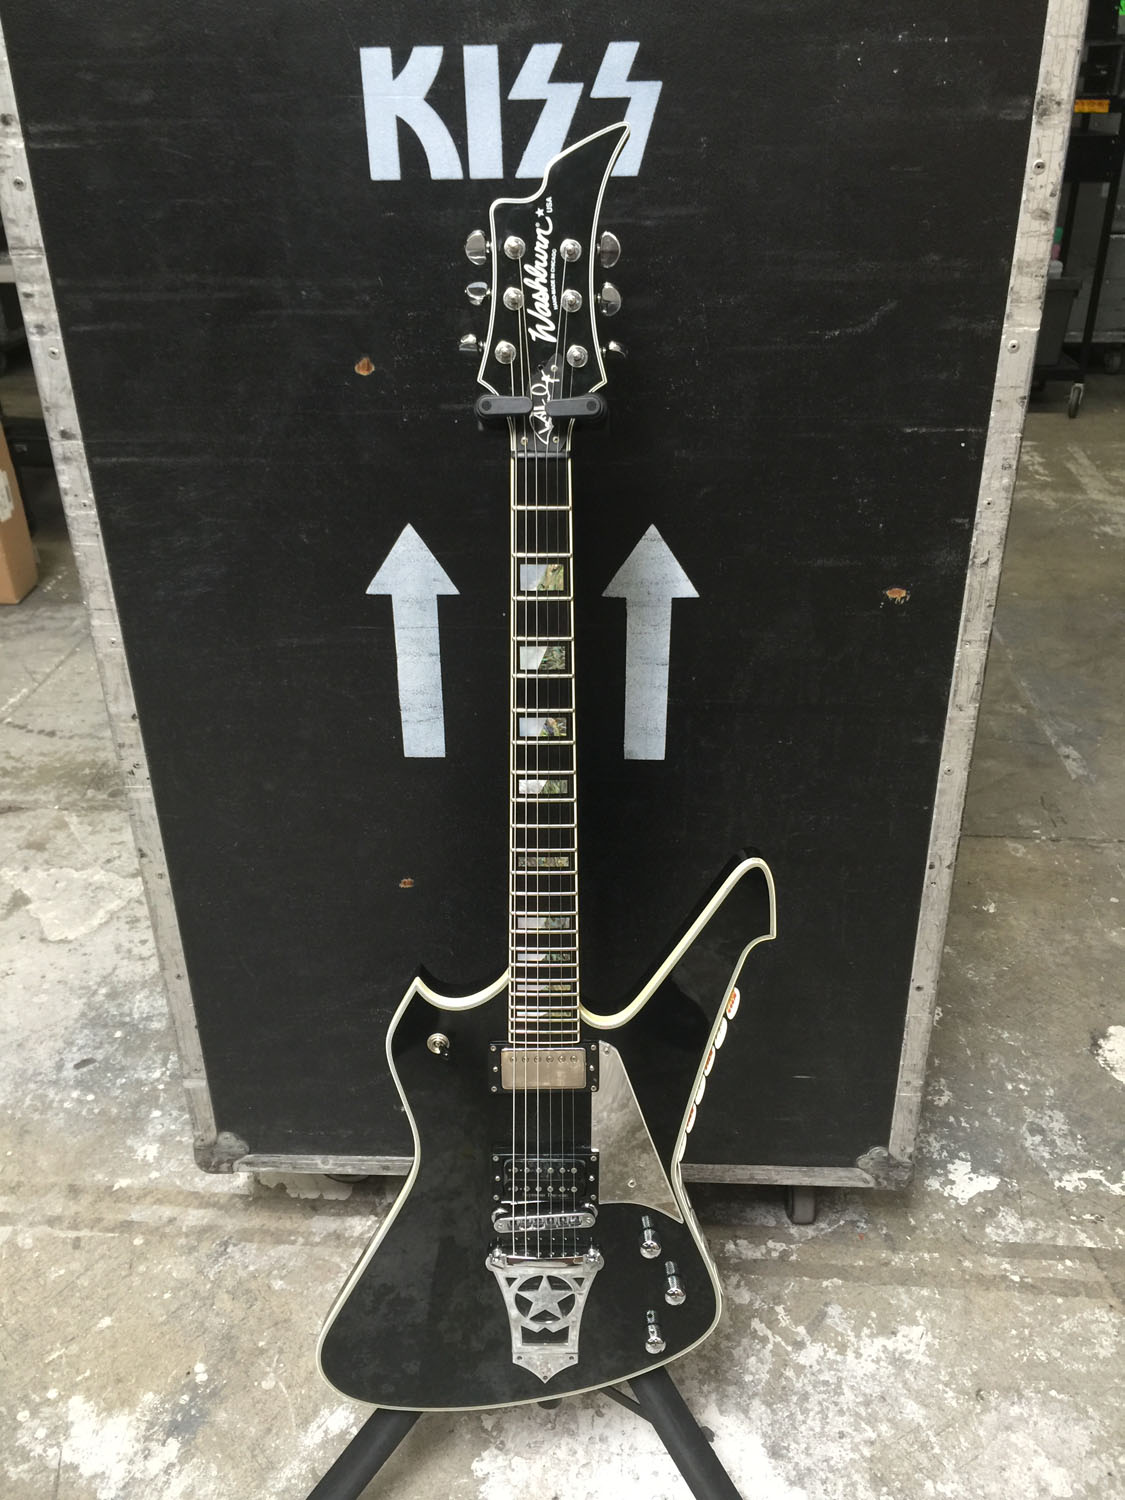 Paul Stanley Guitars - Weapons of Choice: Reunion / Psycho Circus Touring Washburn PS